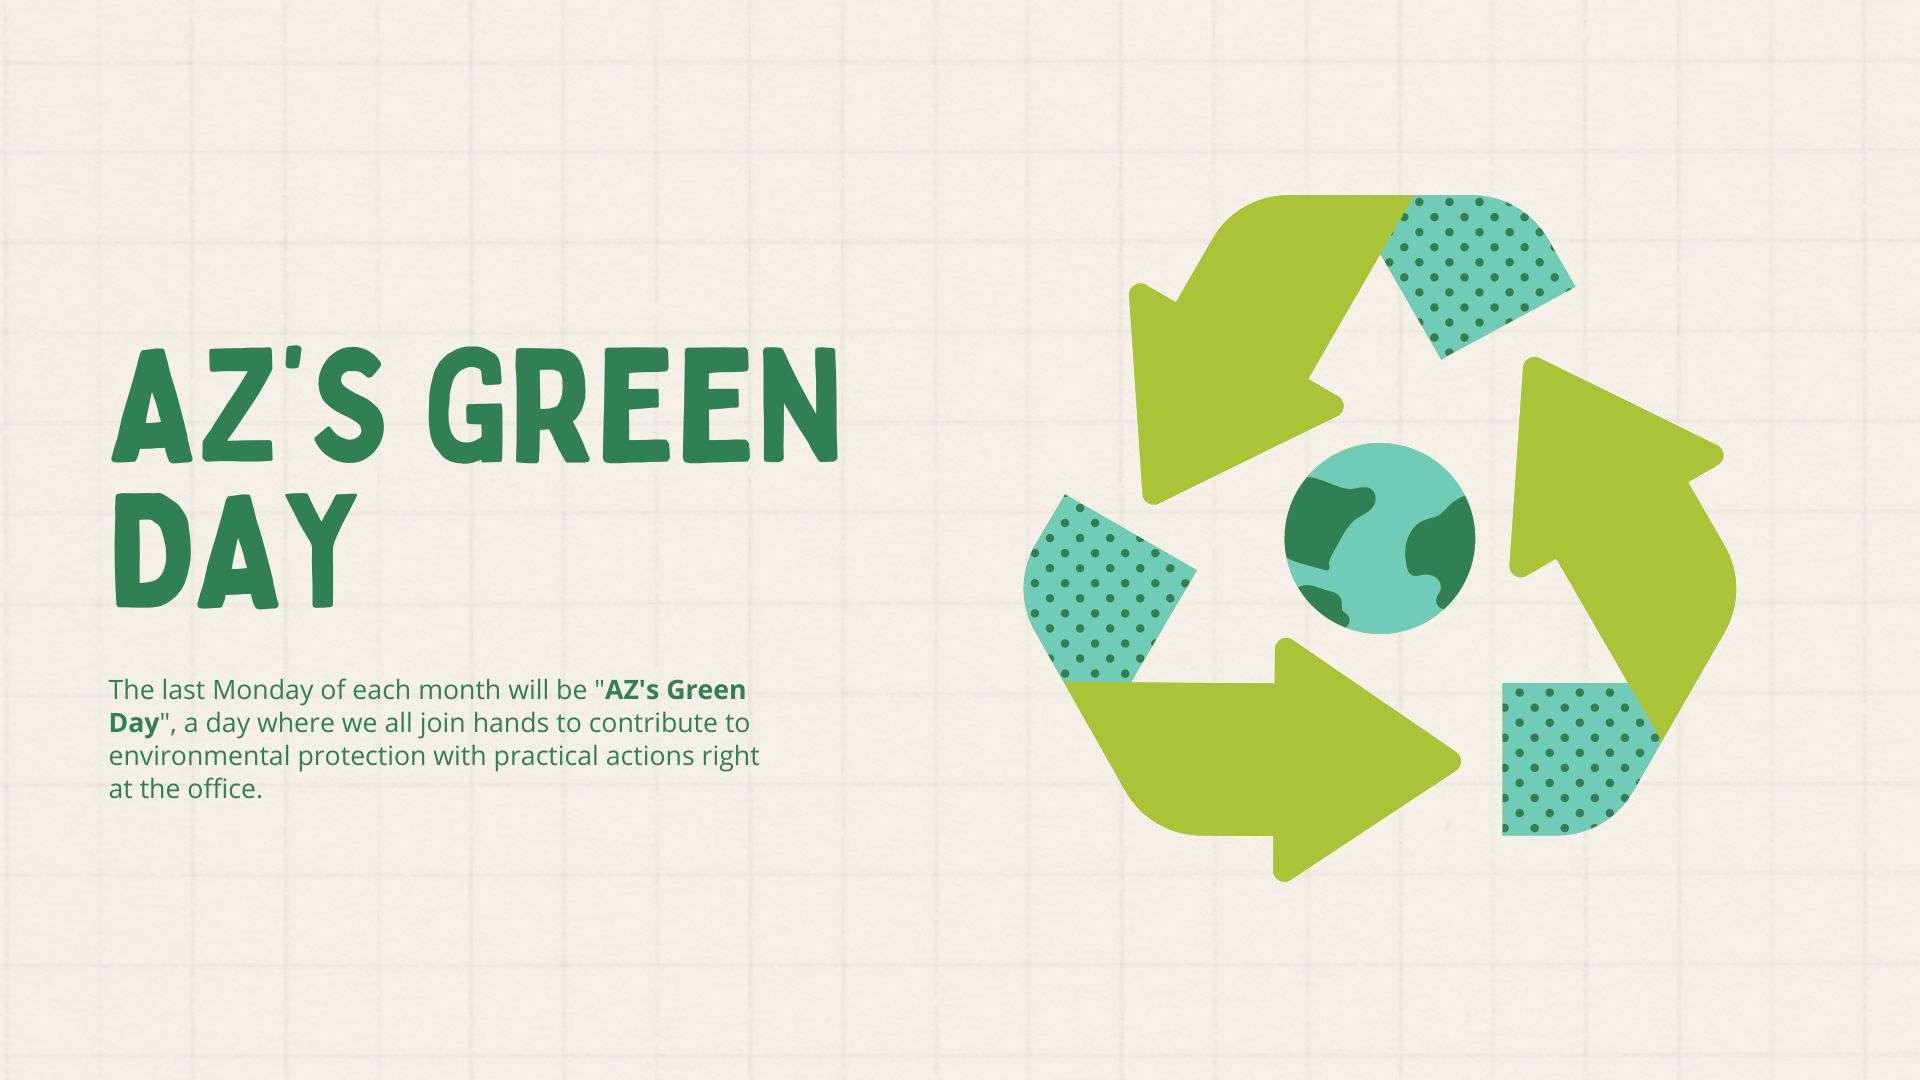 Let’s join hands to protect the environment with “AZ’s Green Day”!